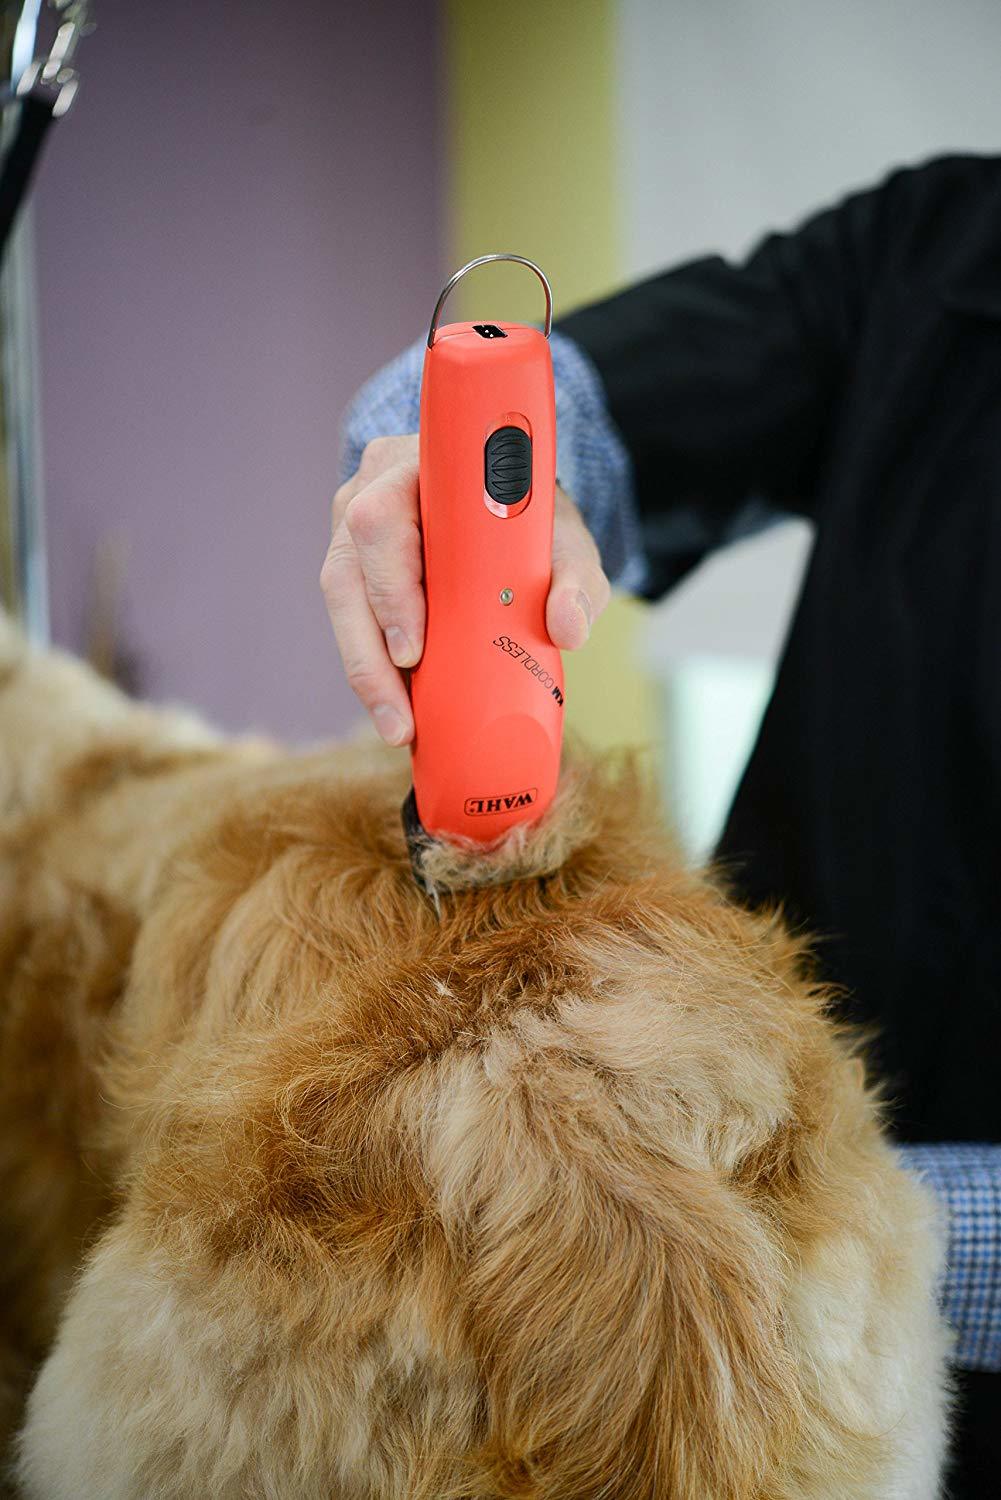 wahl cordless km clippers